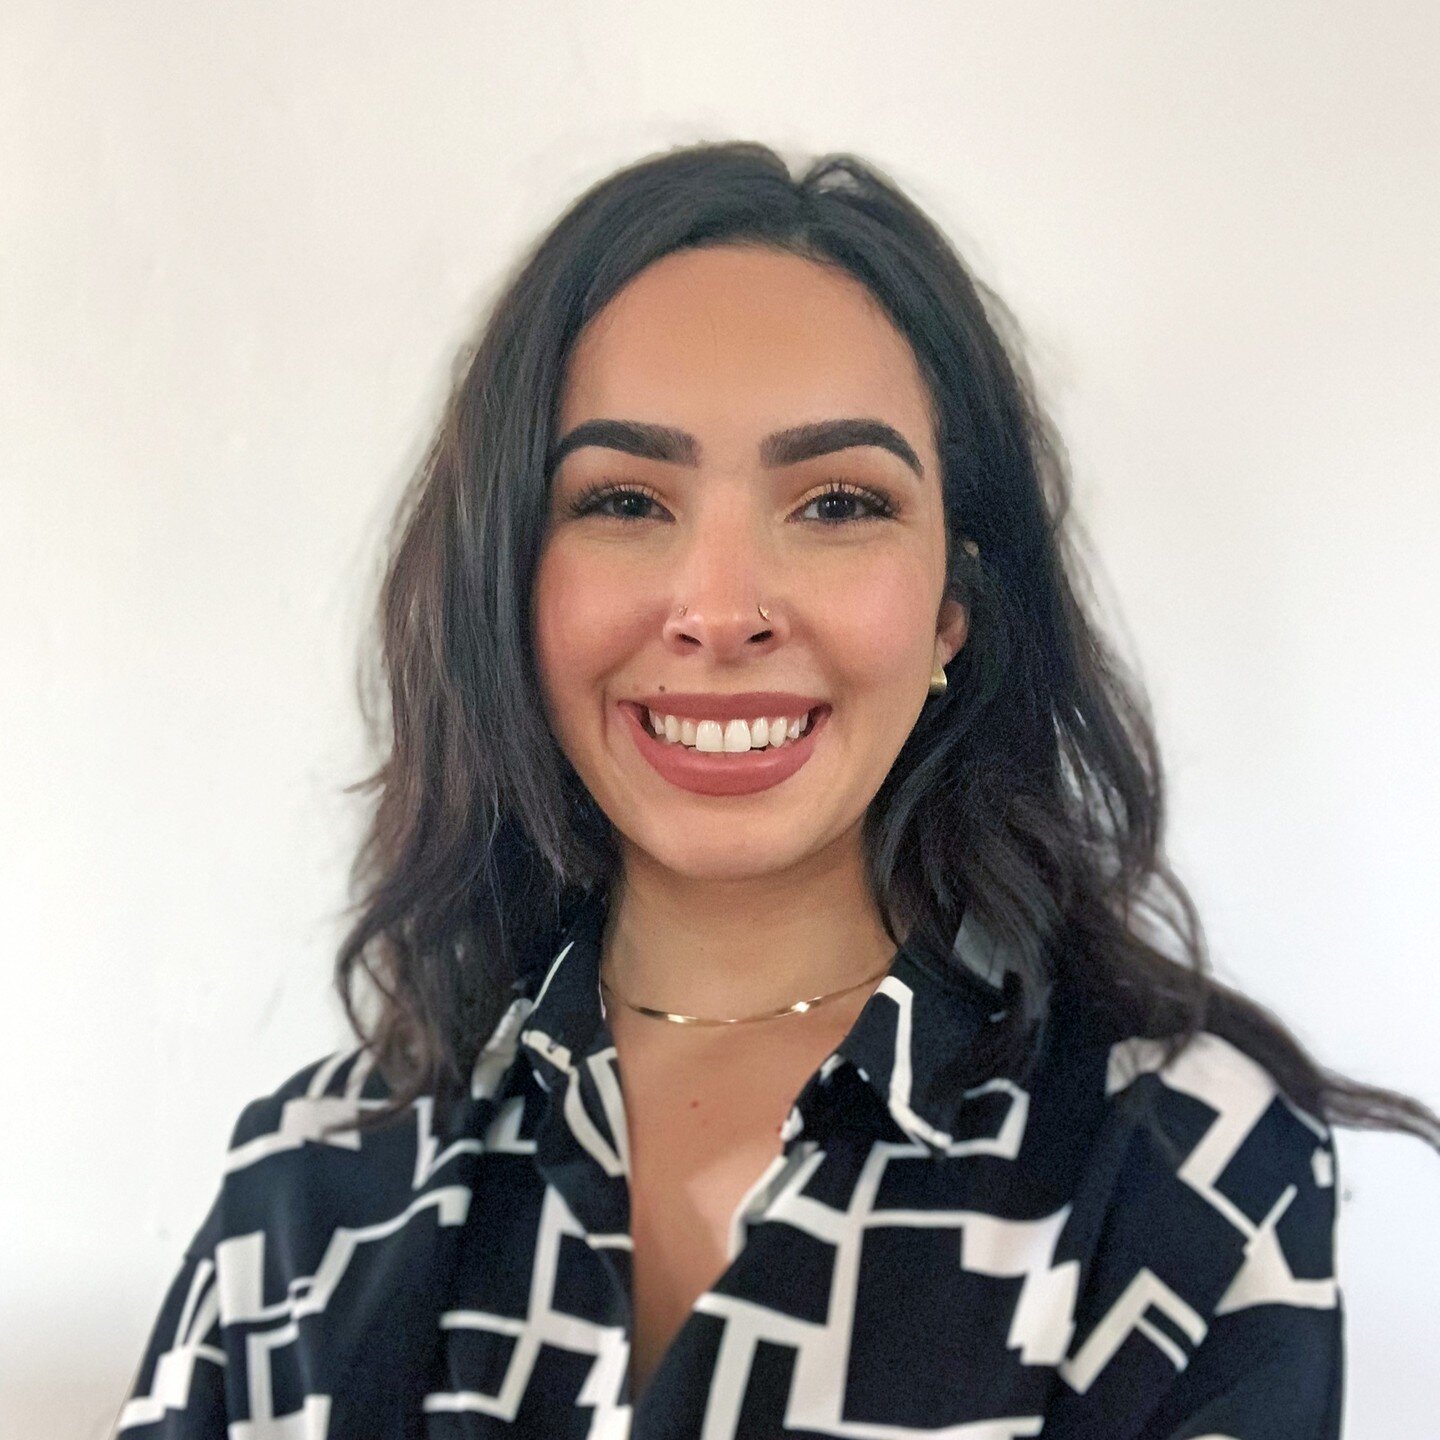 We are thrilled to introduce Isabella as the newest member of Creo! Isabella is a landscape designer with experience in the public and private sector working on a variety of project types including: affordable housing, mixed-use, civic spaces, art in